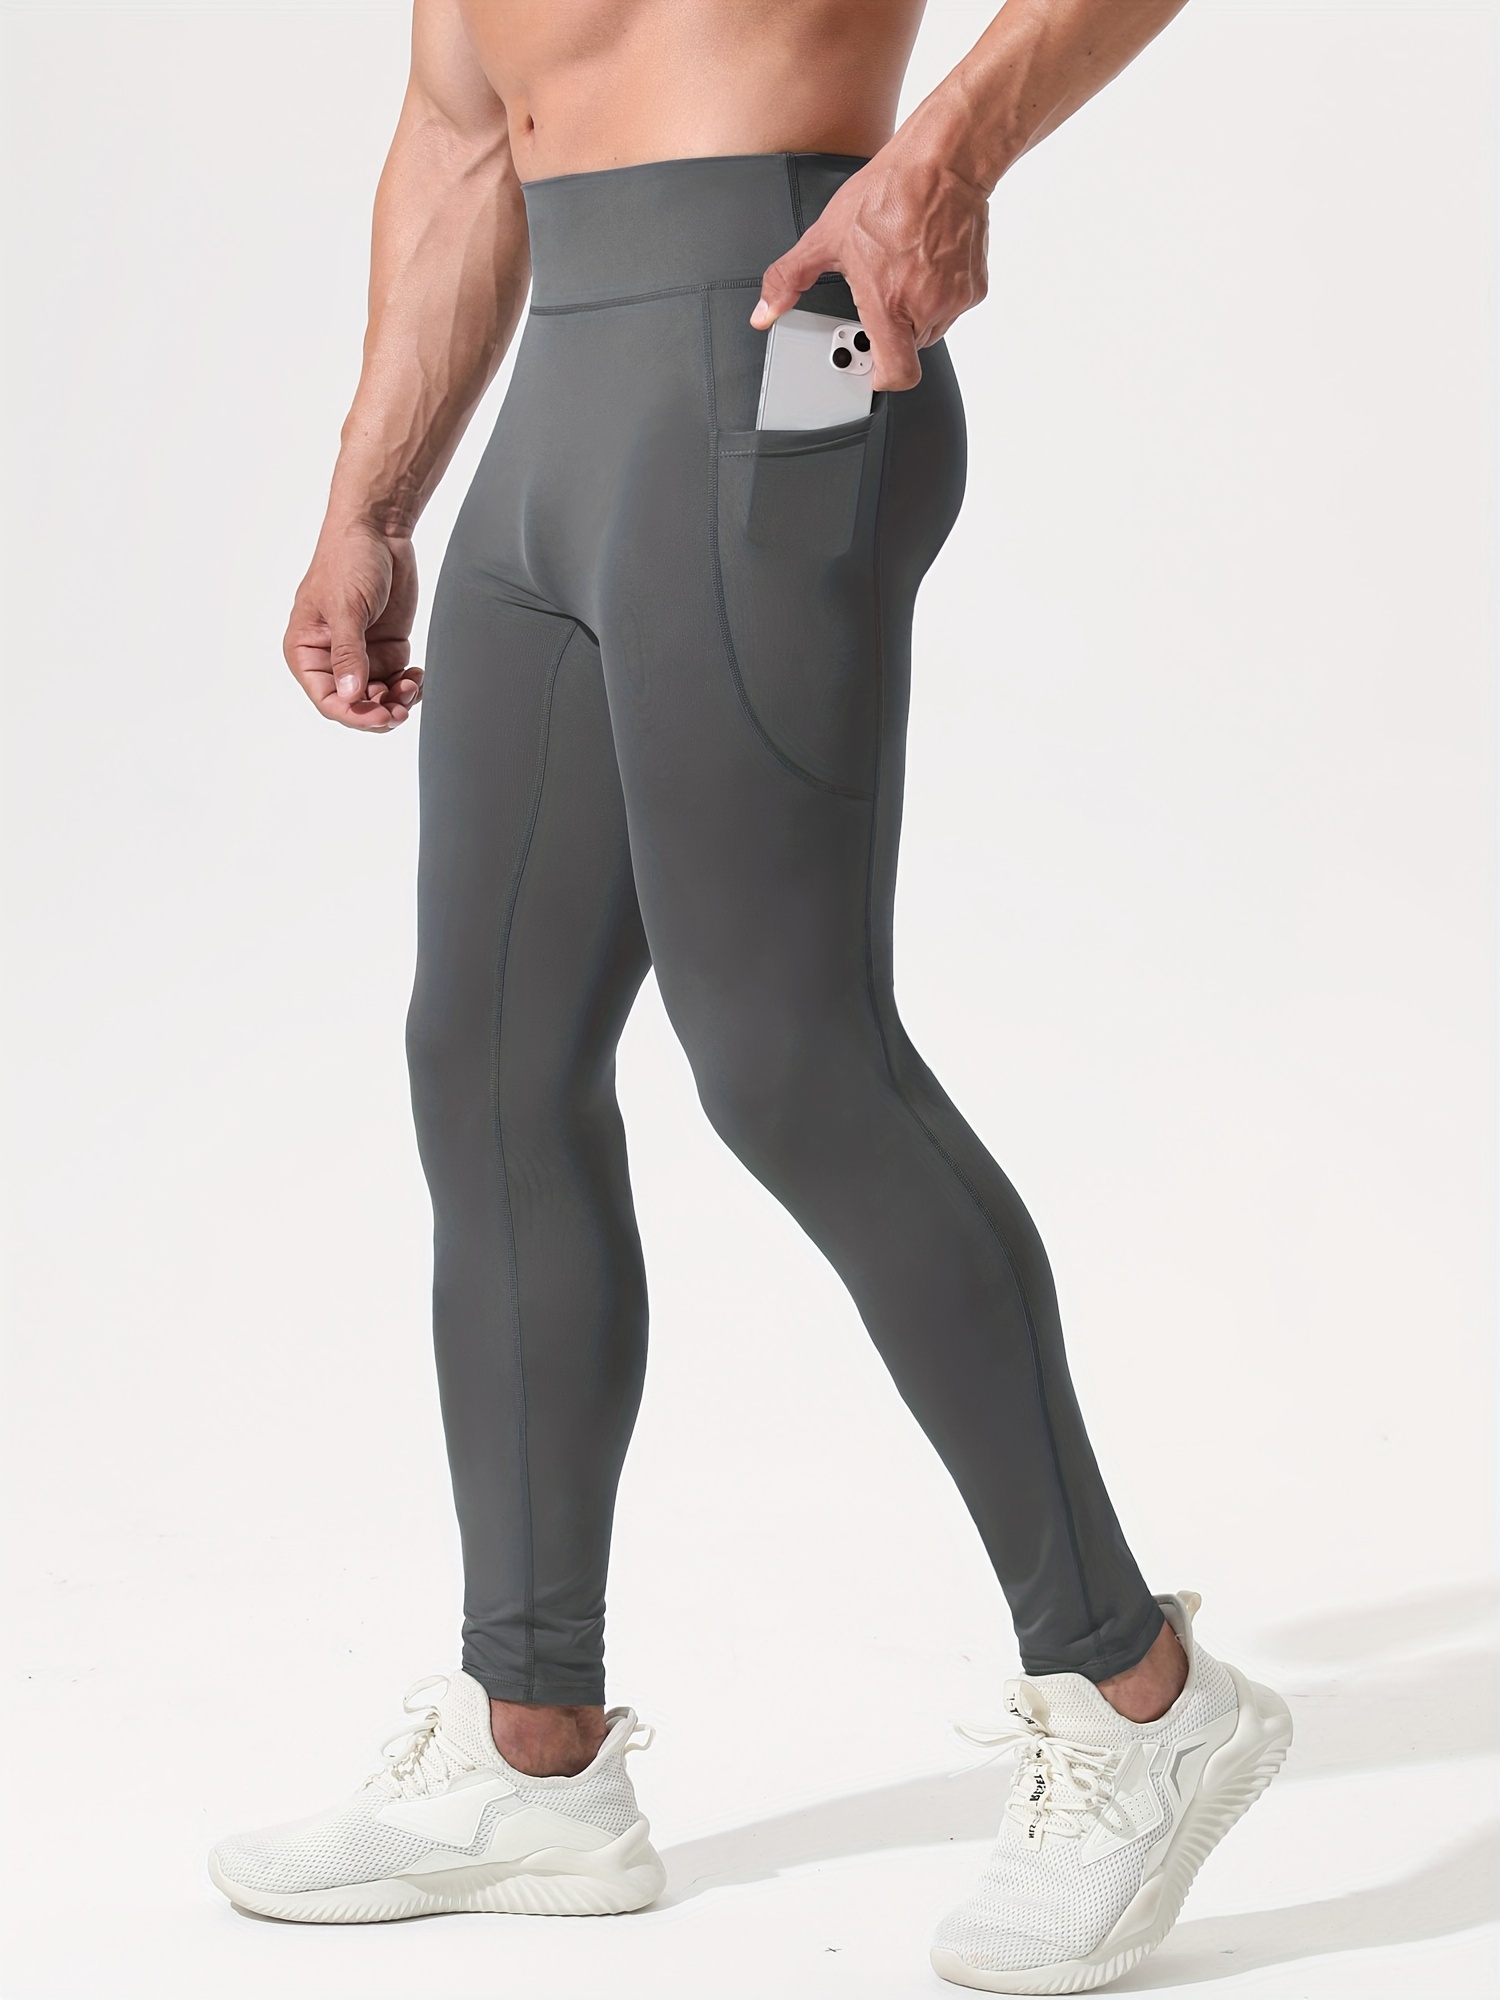 Breathable Quick Dry Compression Compression Leggings For Men Ideal For  Casual Sports, Gym, And Fitness From Ziweilin, $13.07